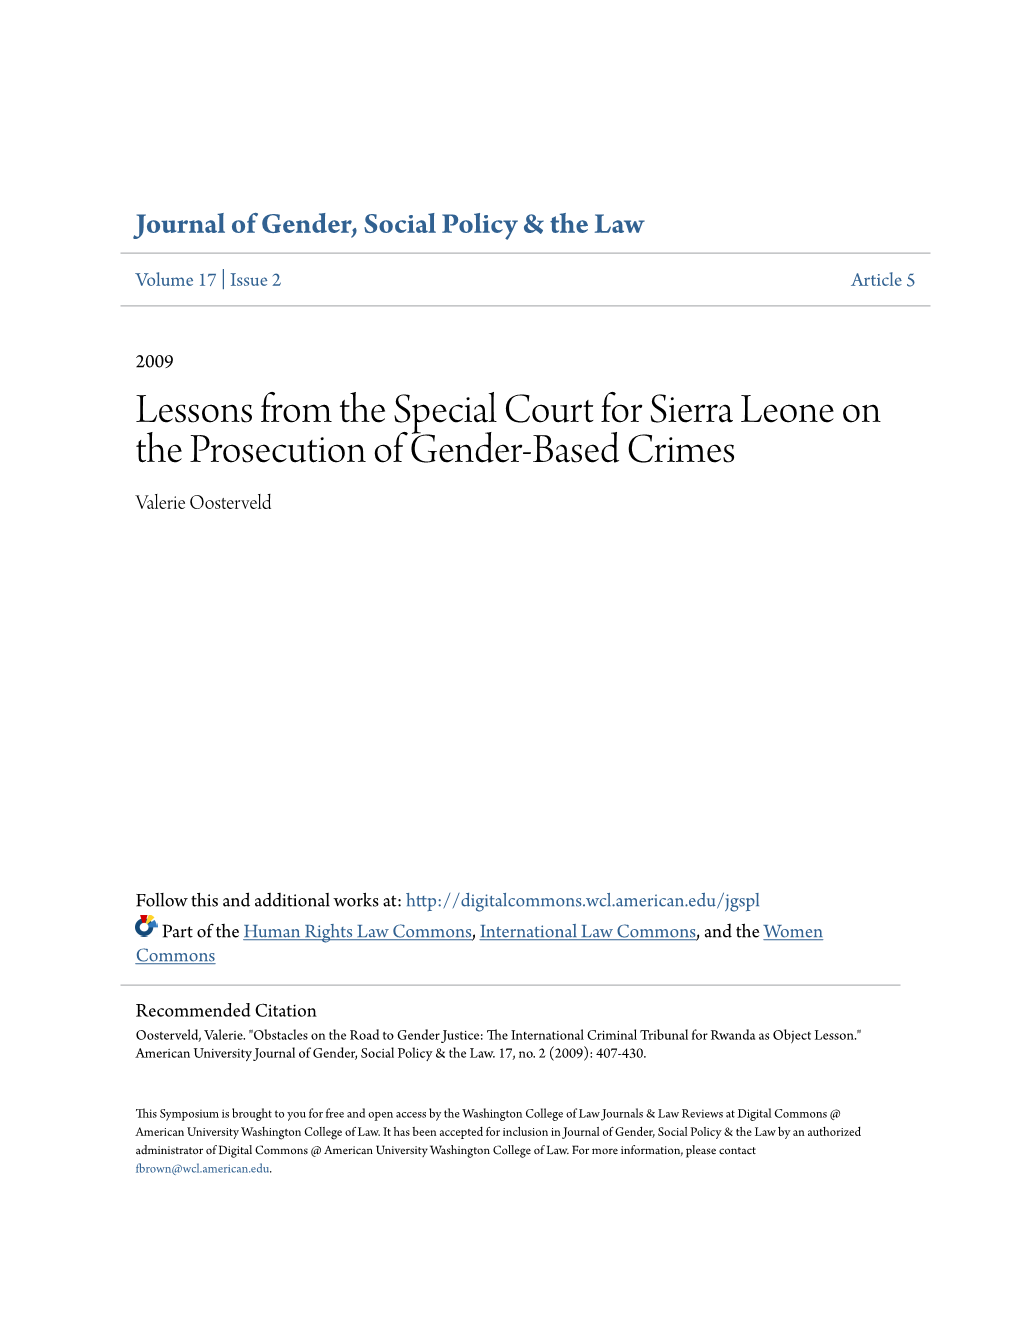 Lessons from the Special Court for Sierra Leone on the Prosecution of Gender-Based Crimes Valerie Oosterveld